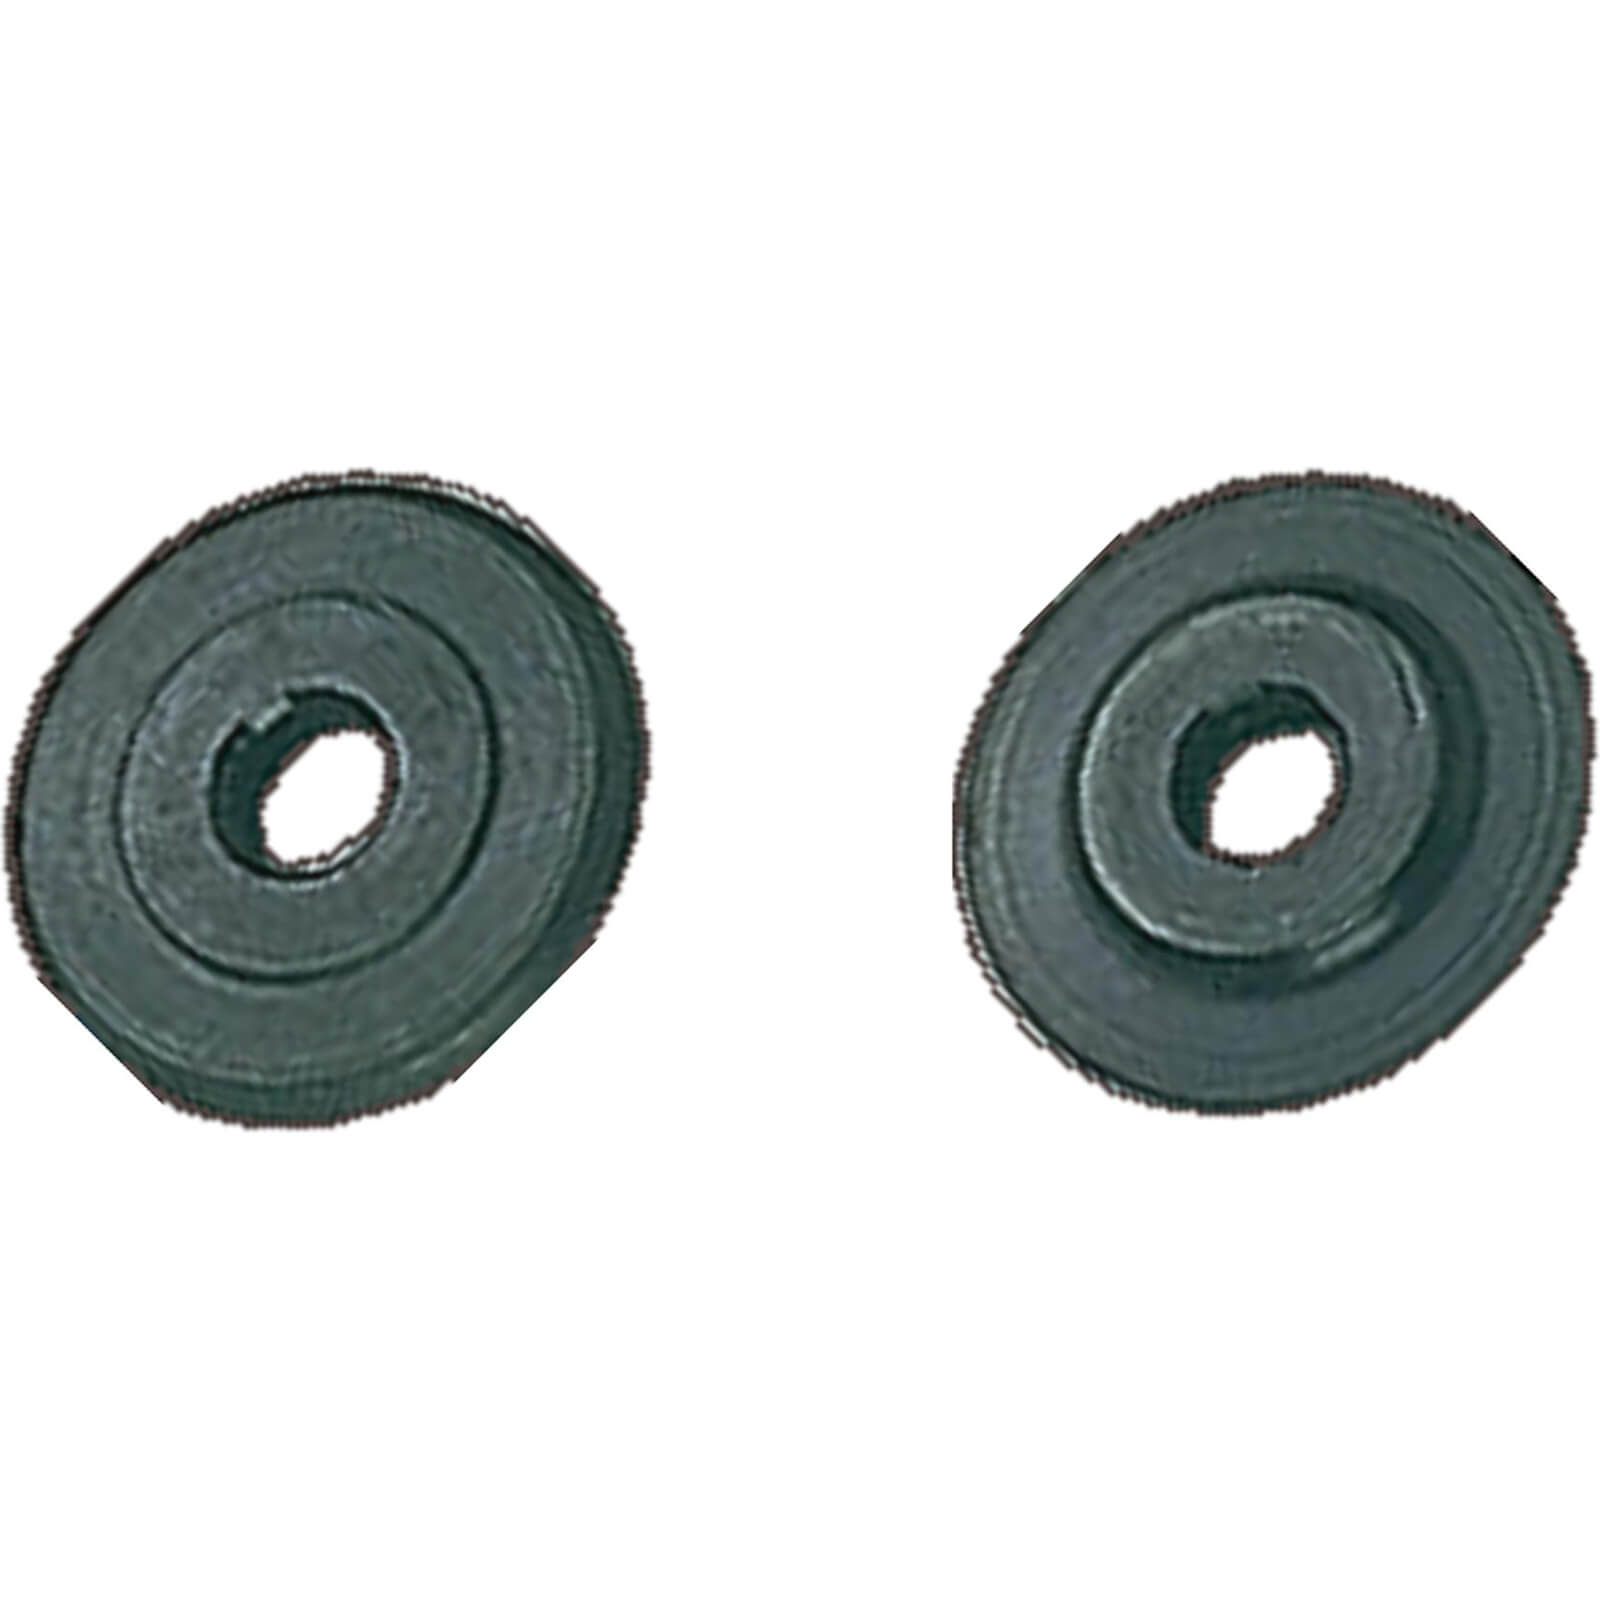 Bahco Spare Wheels for 30615 Copper Pipe Cutter Pack of 2